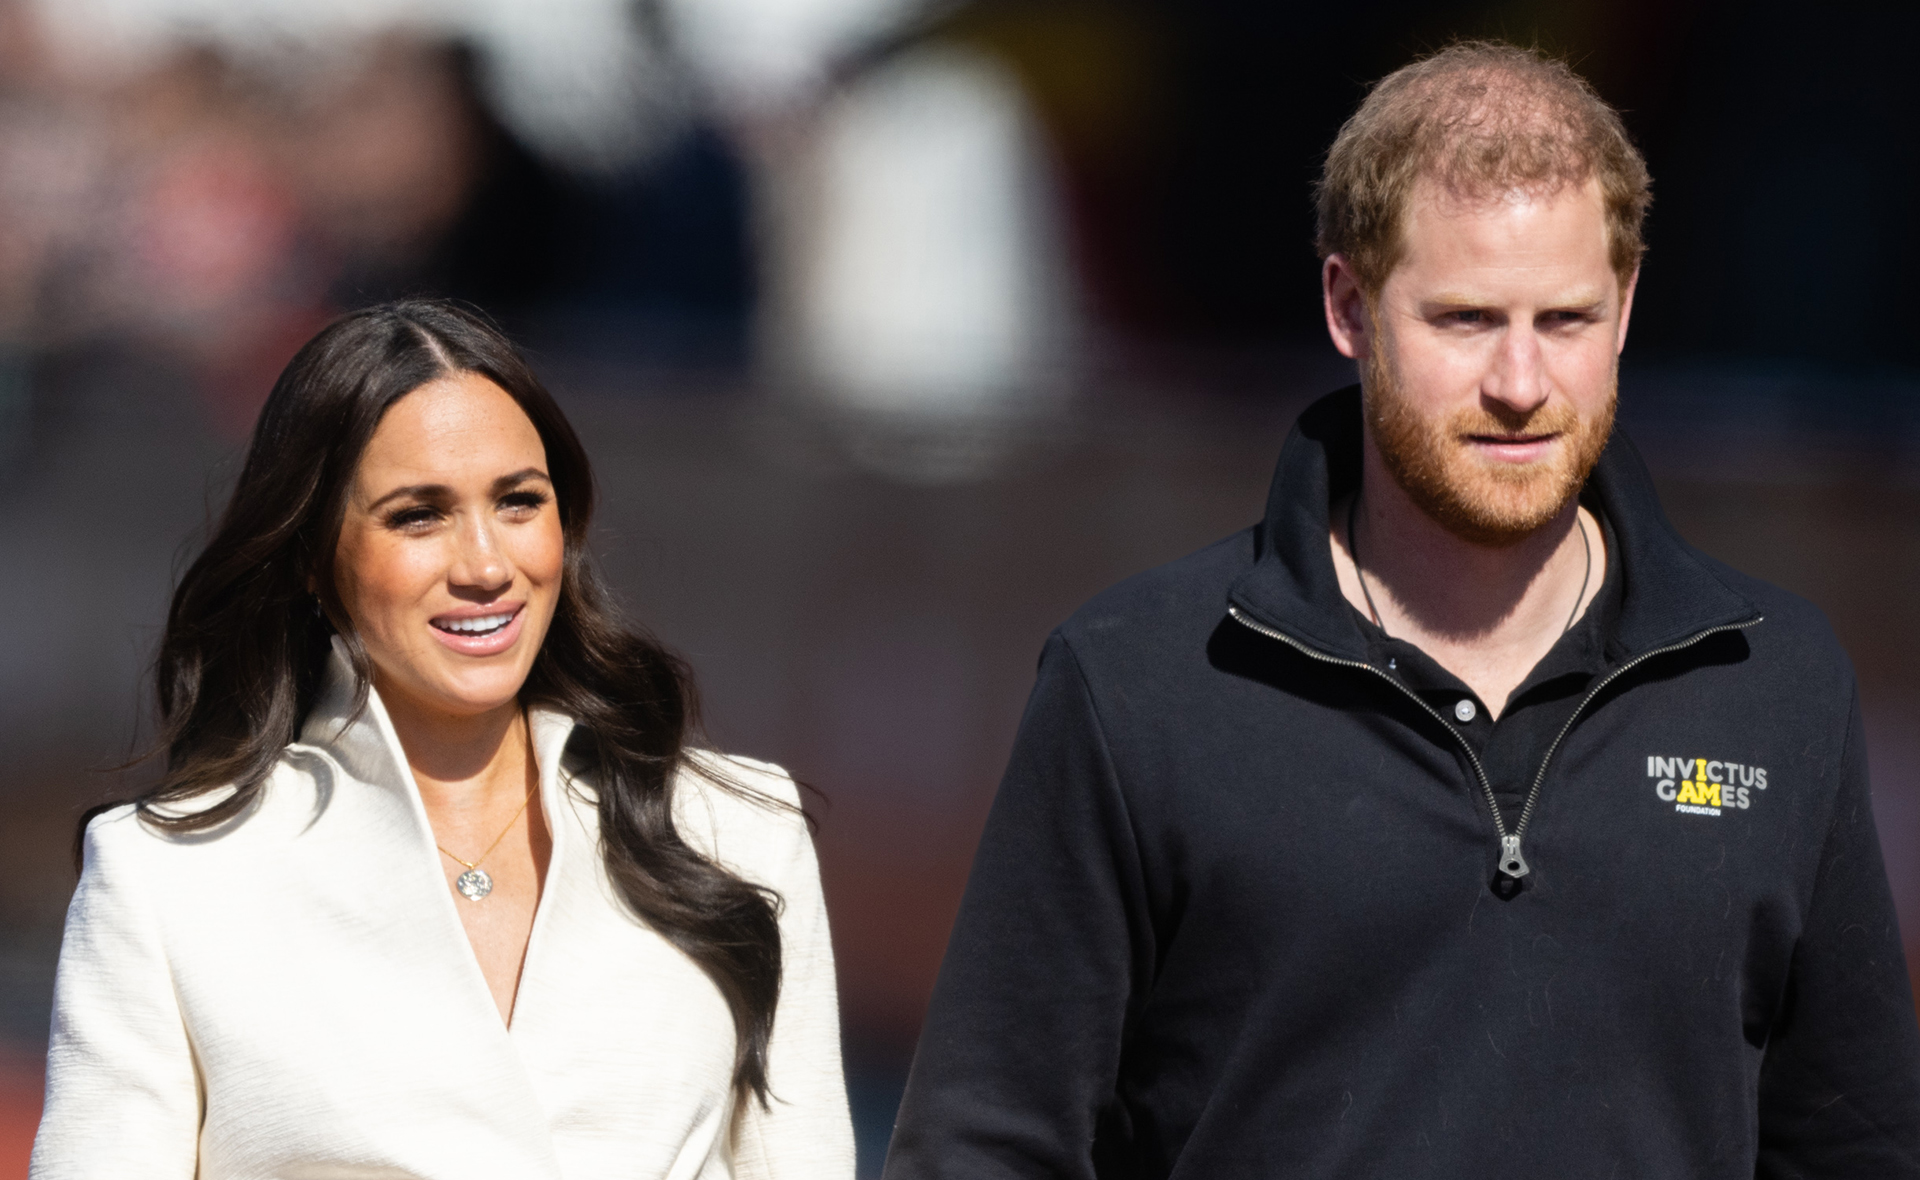 Prince Harry and Meghan, Duchess of Sussex’s next official public appearance has been confirmed – and it’s a cause very close to their hearts